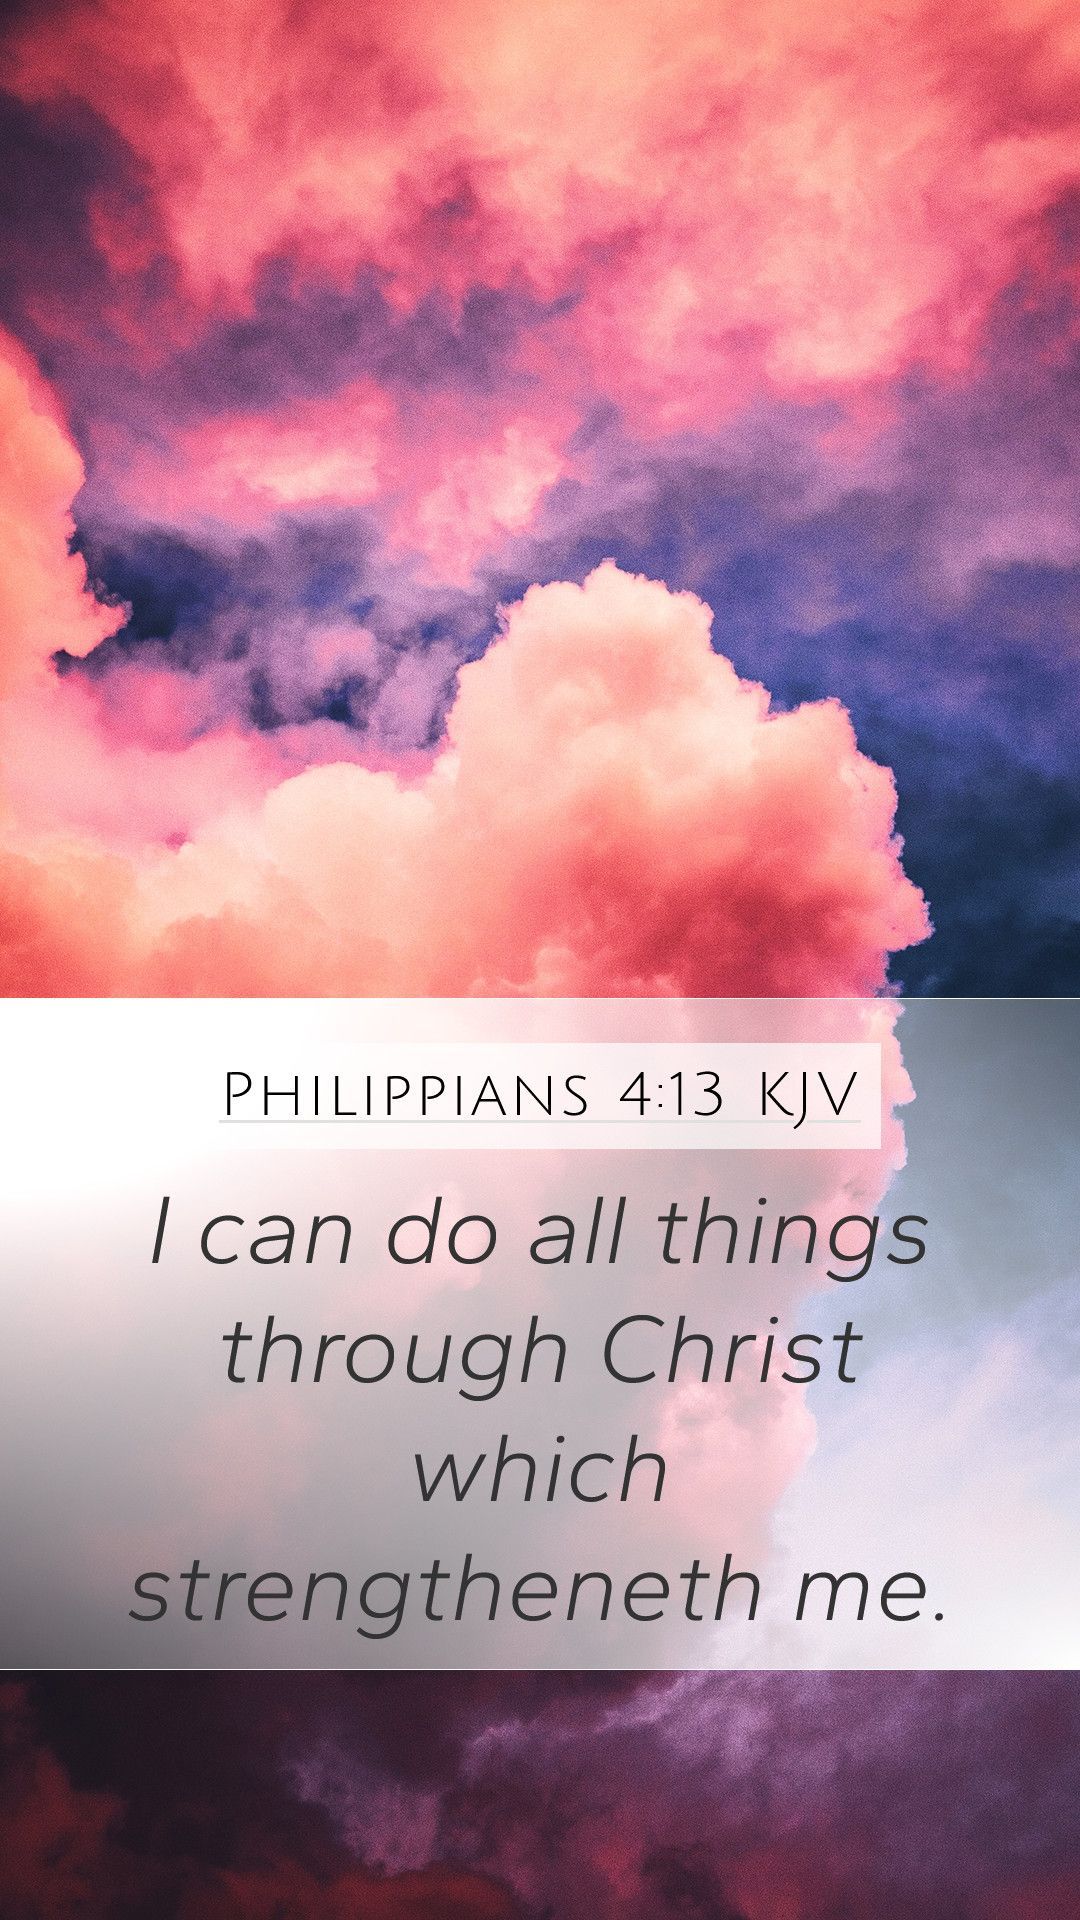 A cloudy sky with the words philippians 413 kjv on it - Christian, Jesus, christian iPhone